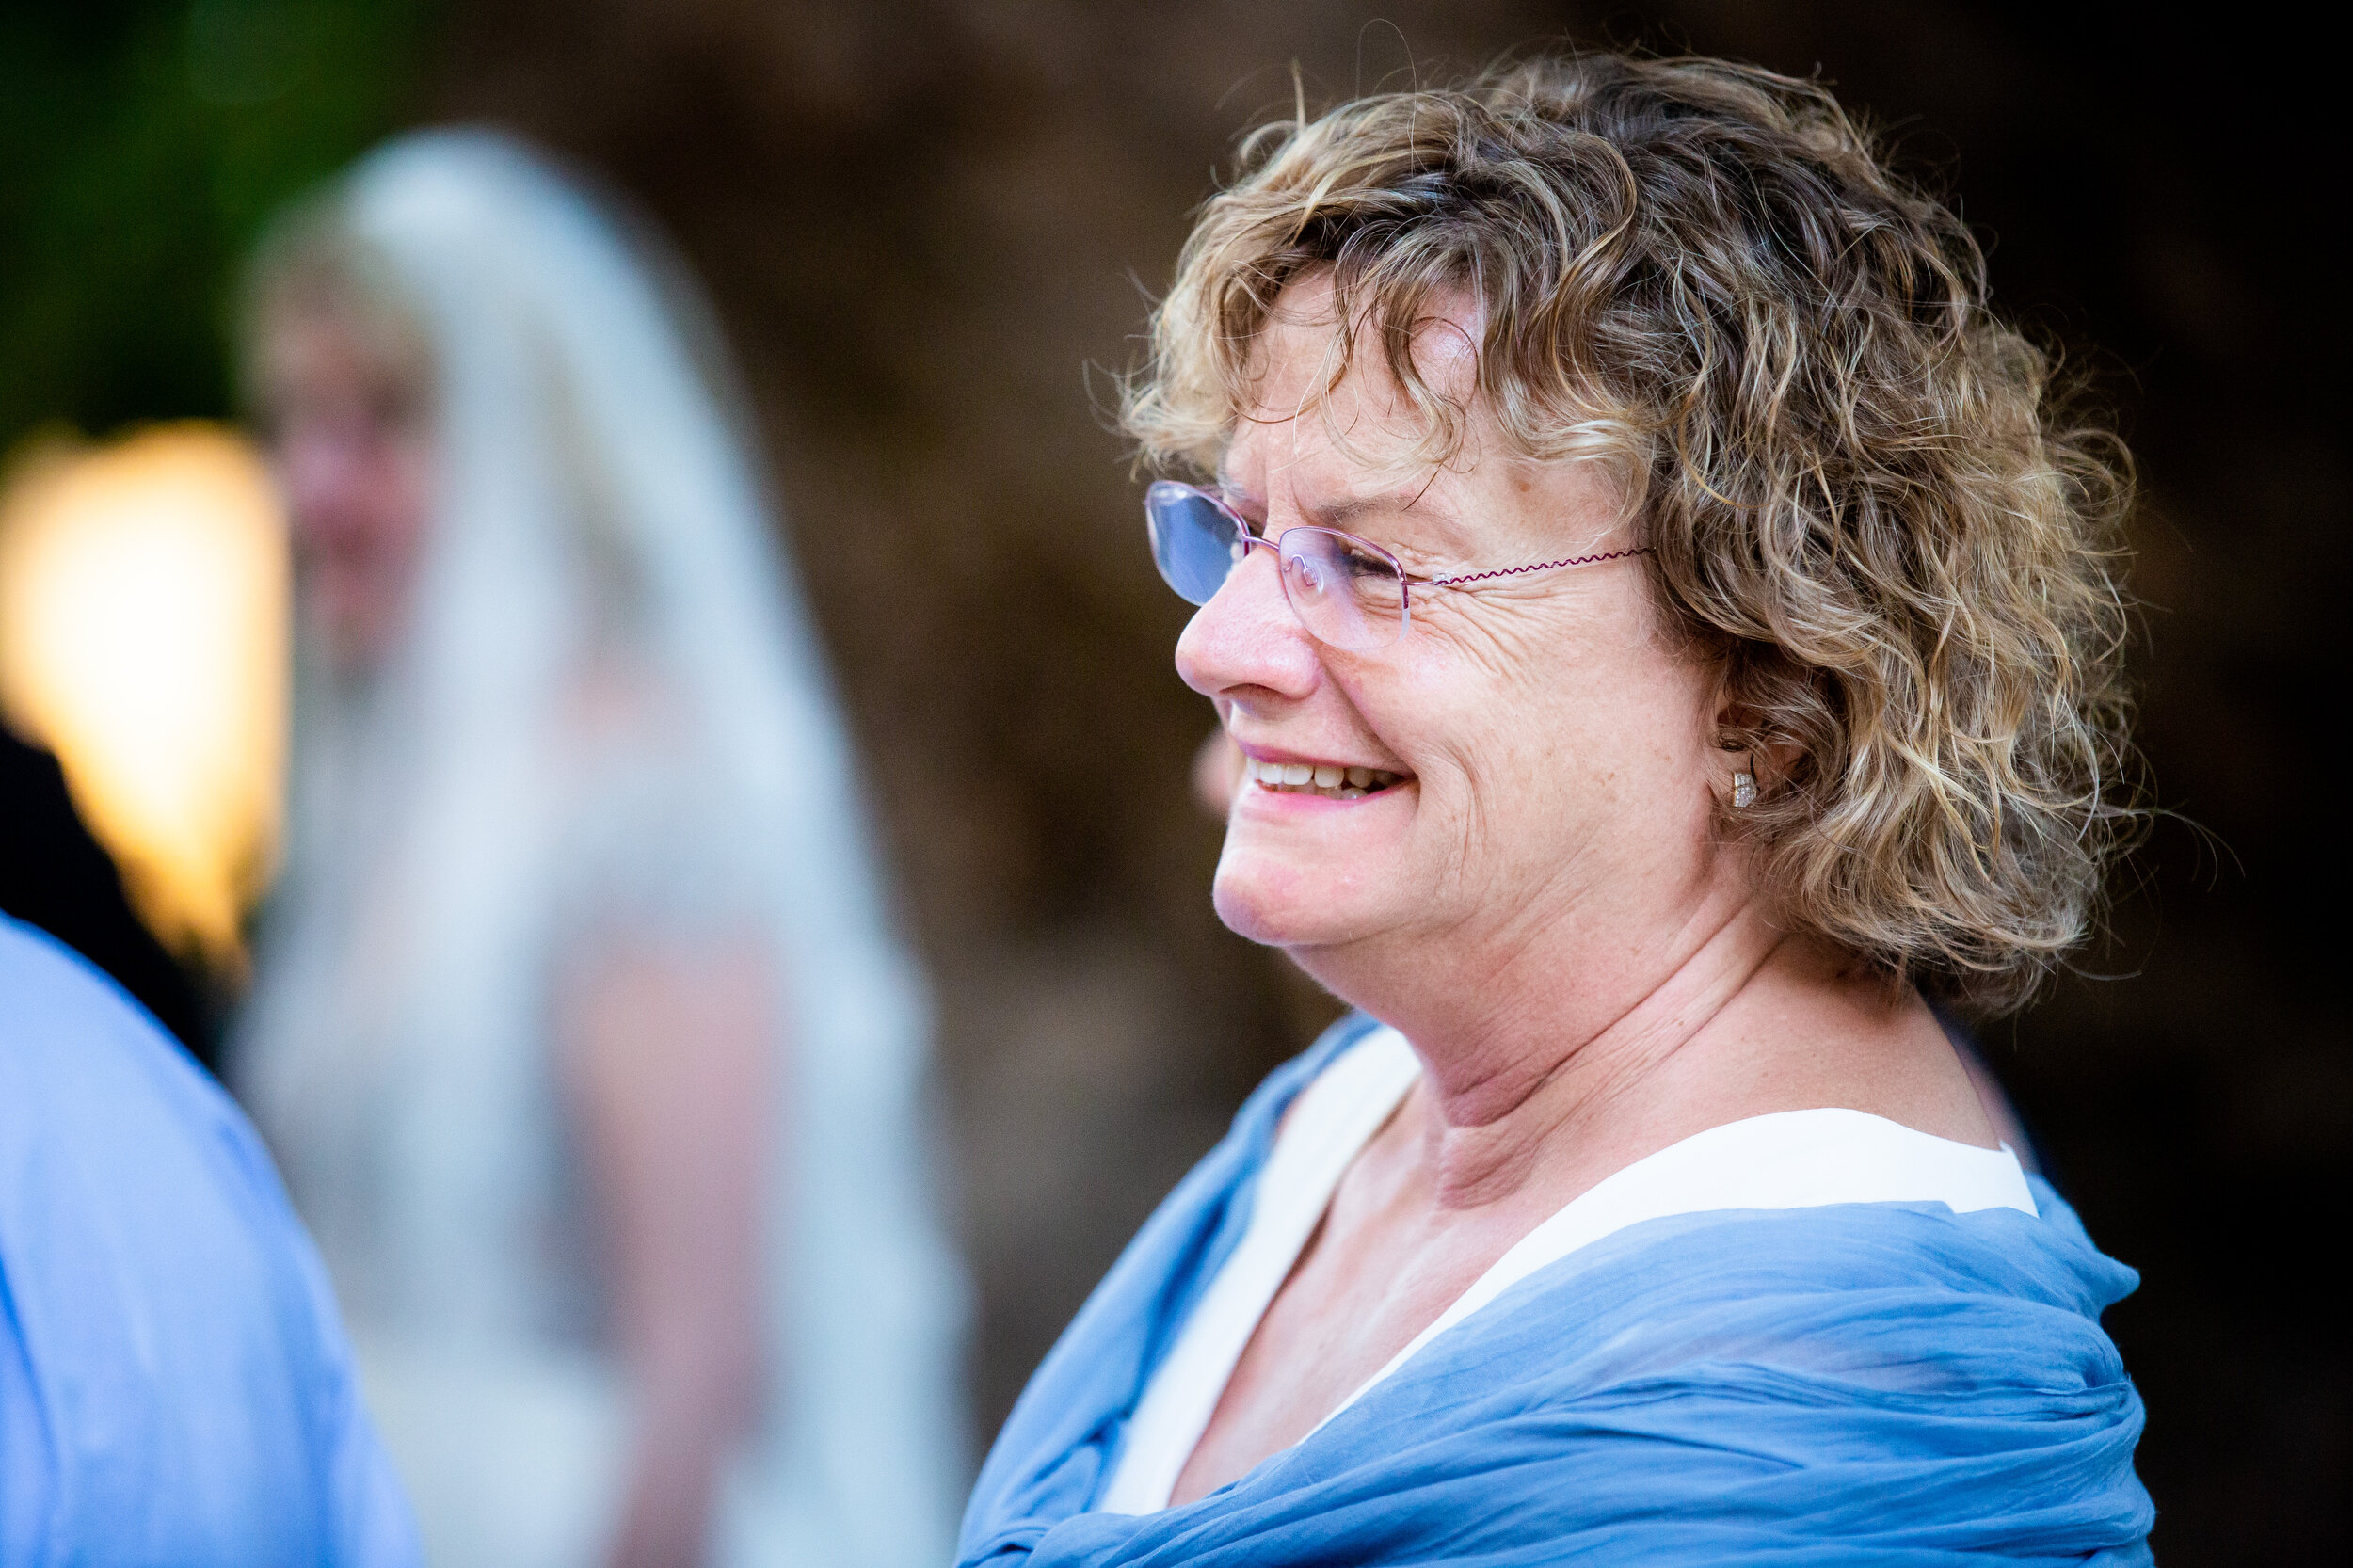 Mother of the groom smiles during her son's wedding ceremony:  destination wedding photo at the Lost Unicorn Hotel, Tsagarada, Greece by J. Brown Photography.